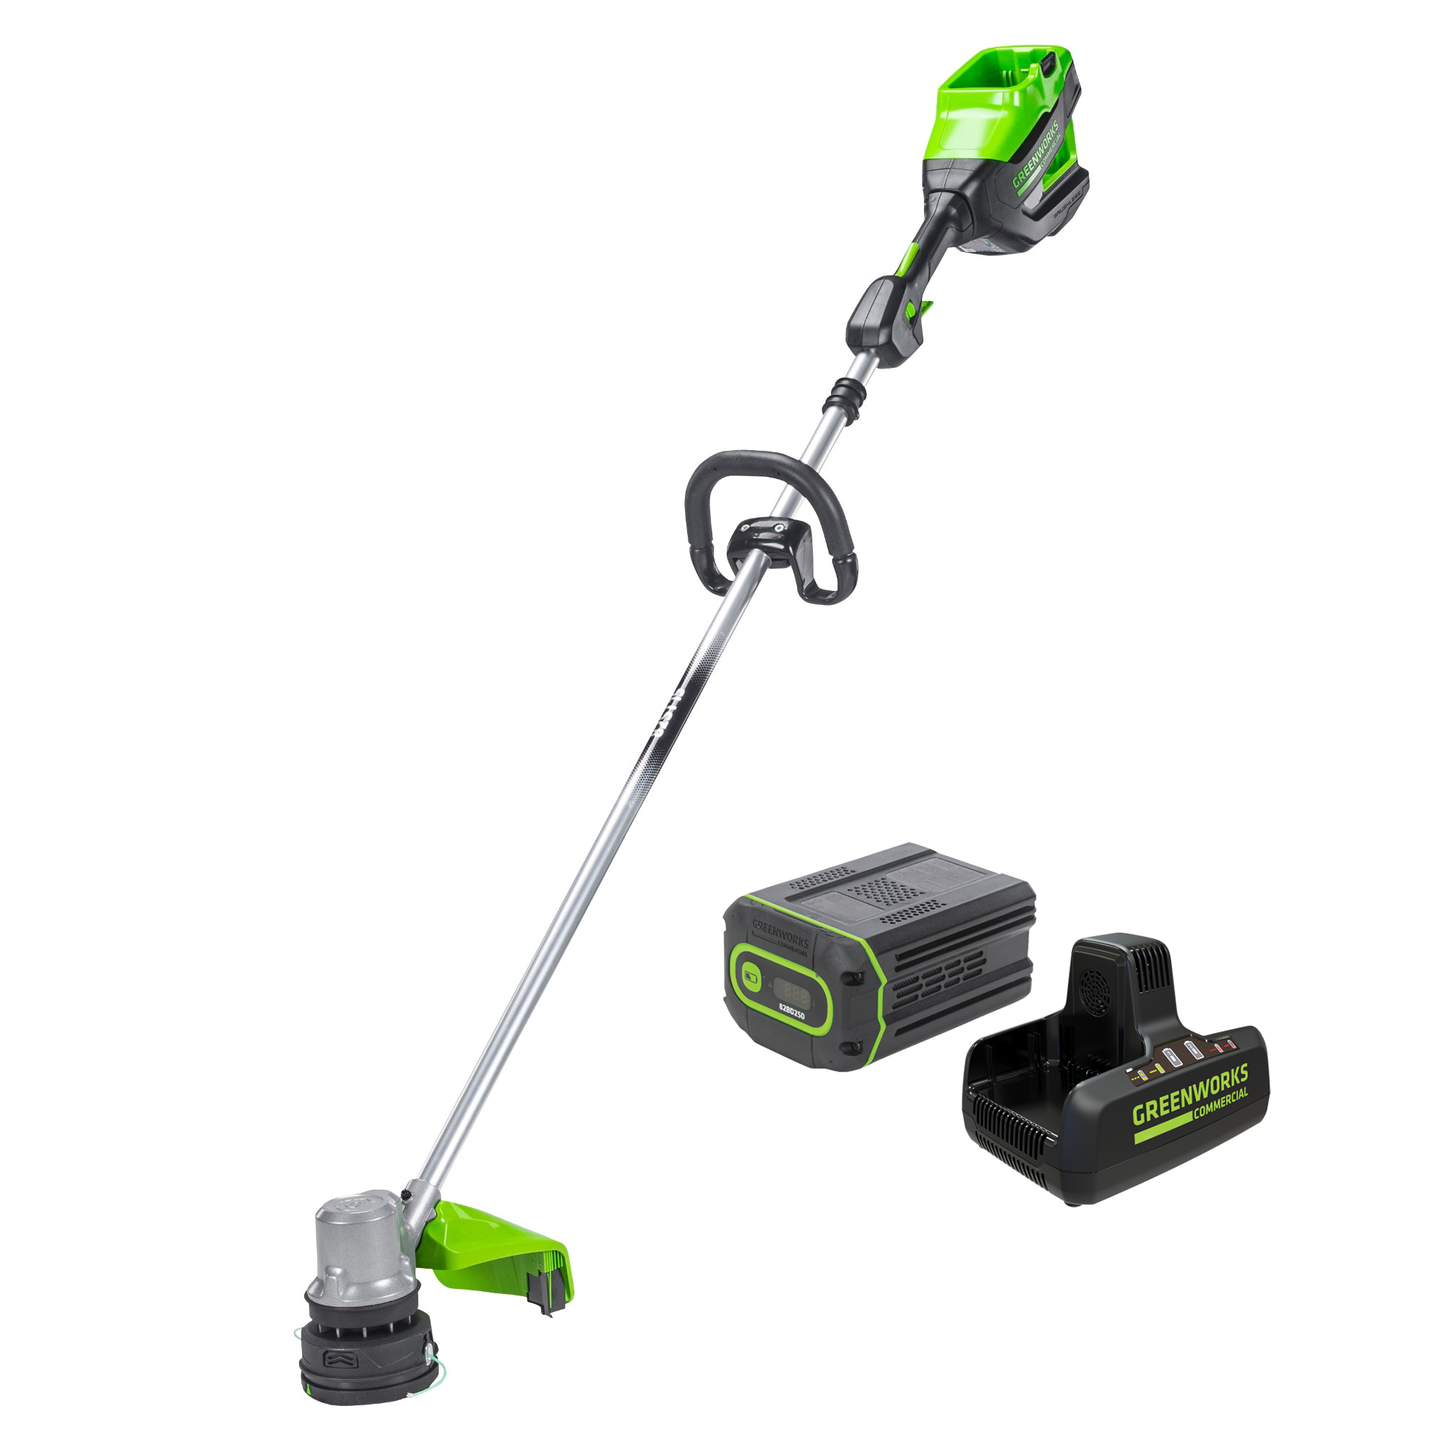 GW82V 1.5KW Prosumer FM String Trimmer with 2.5Ah Battery &8A DP Charger (82ST151)